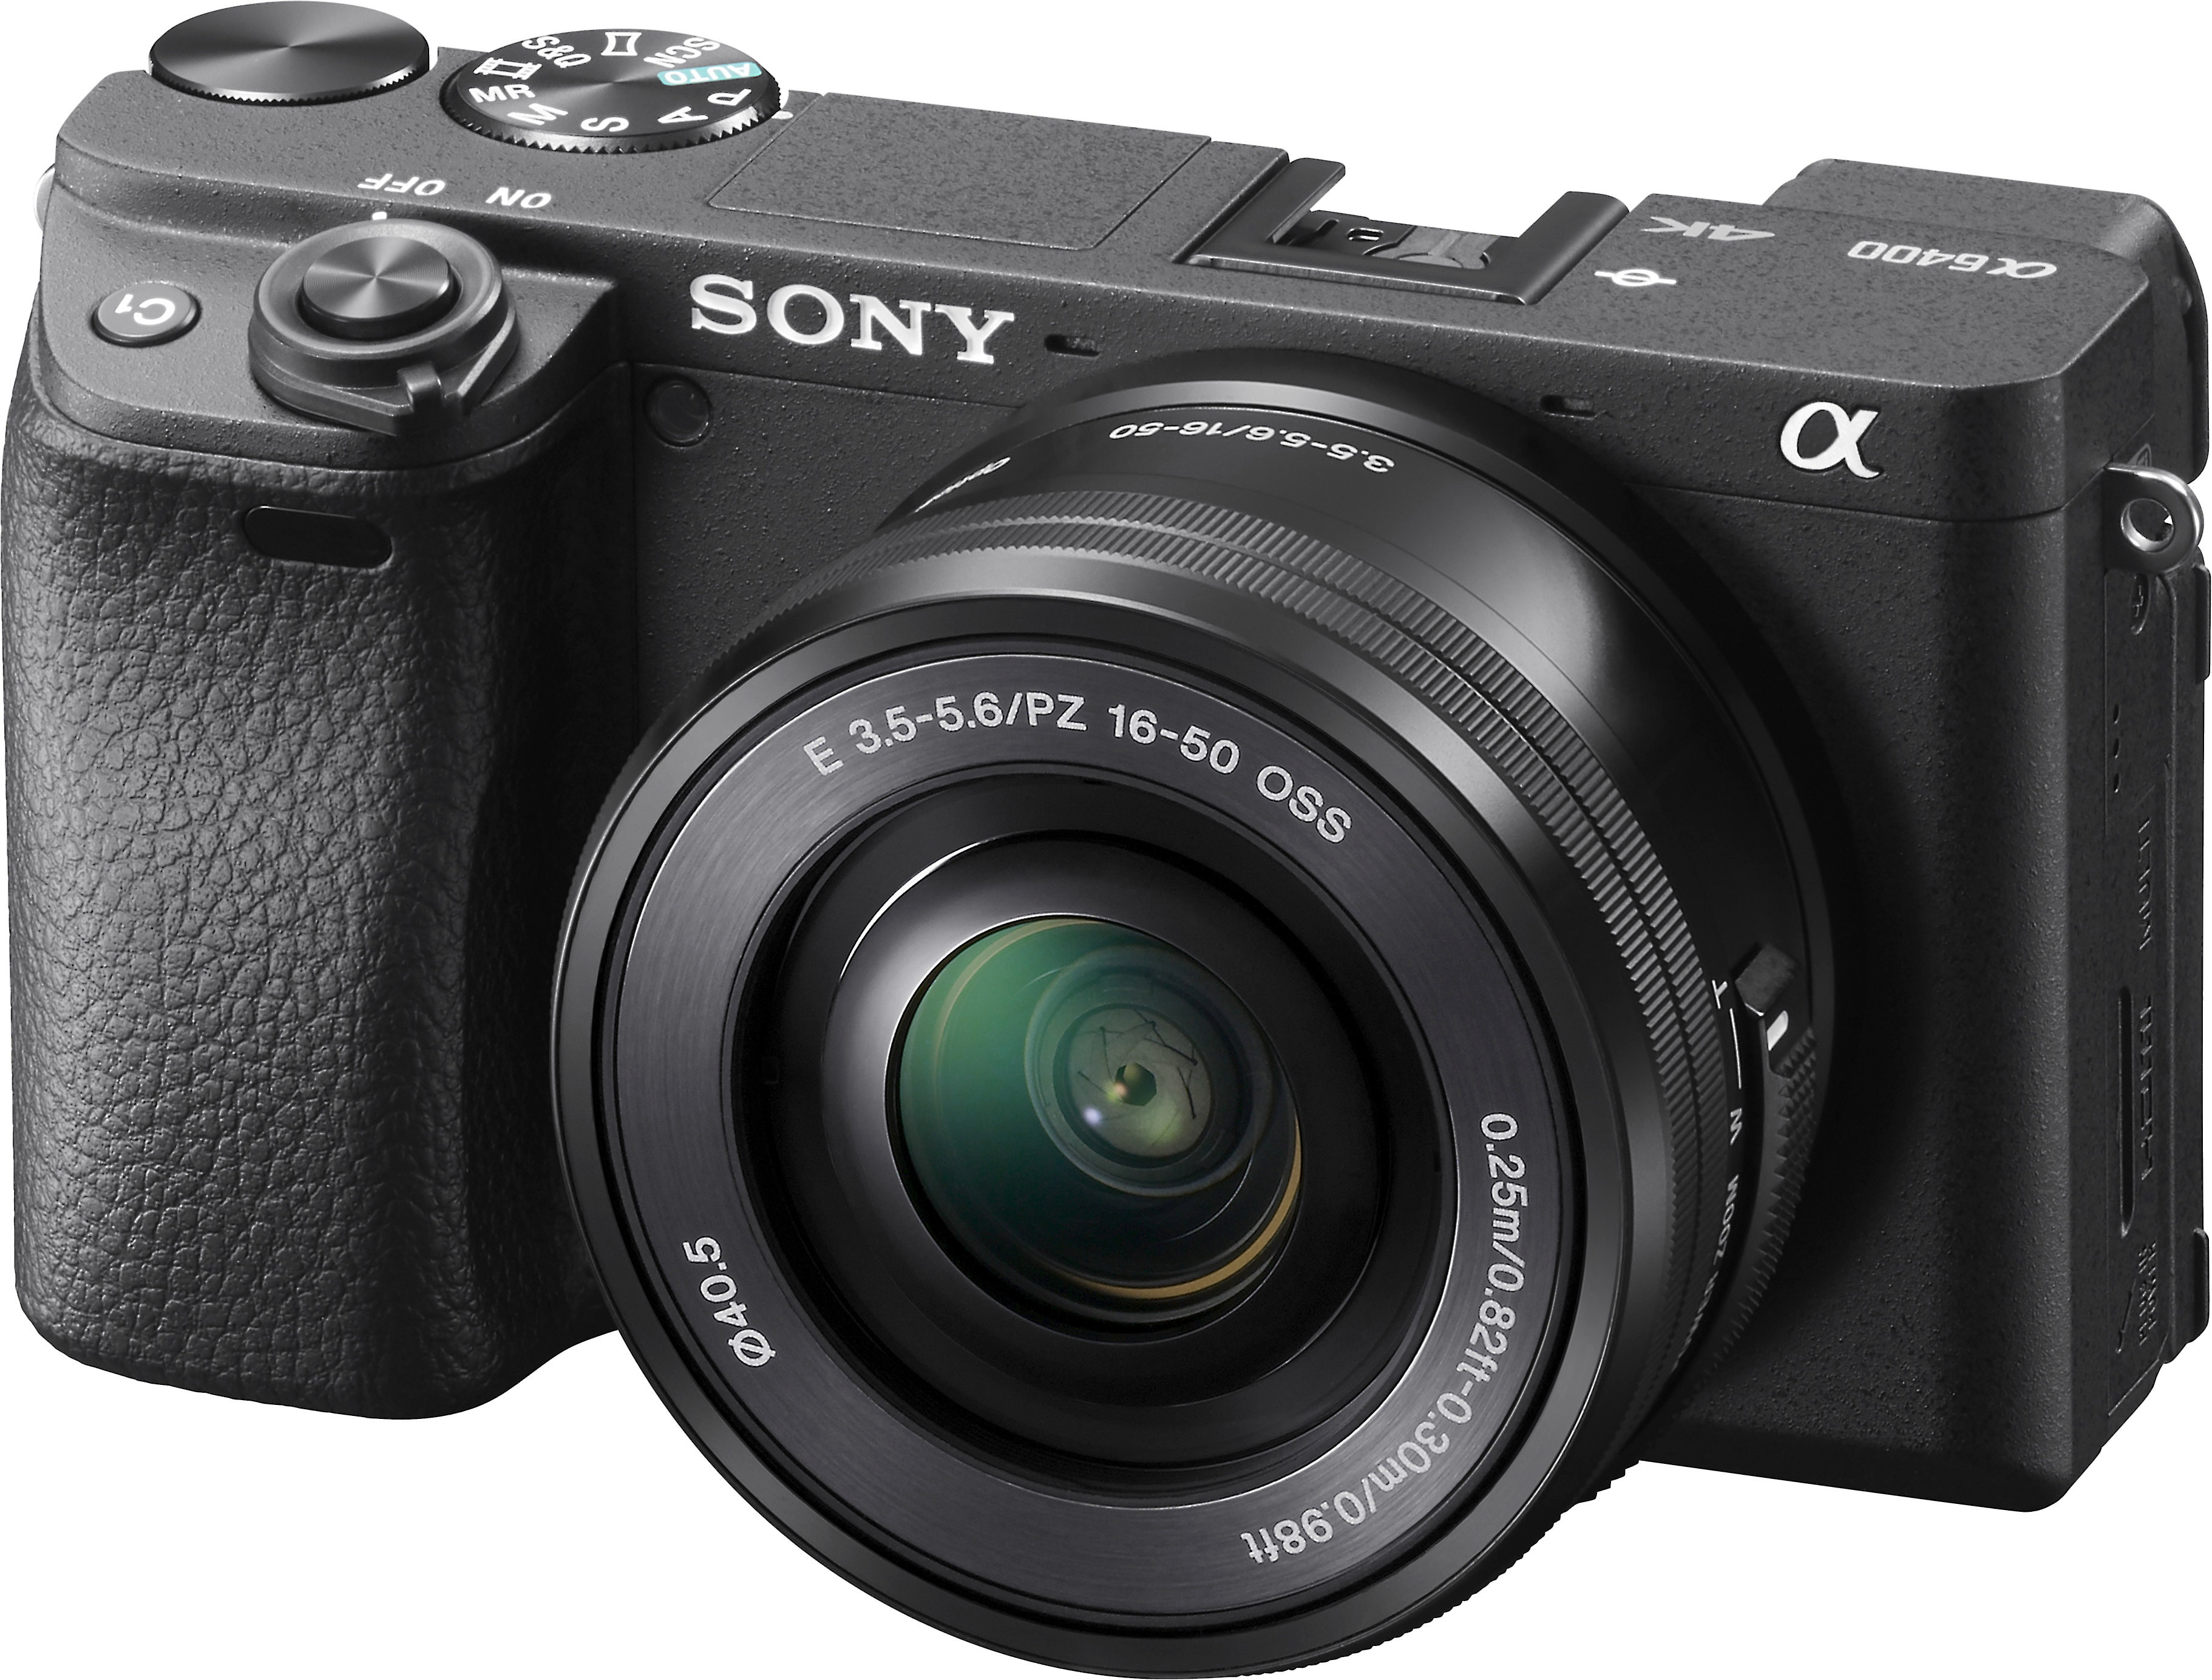 Sony a6400 Review: An Excellent Performer With A Few Trade-offs